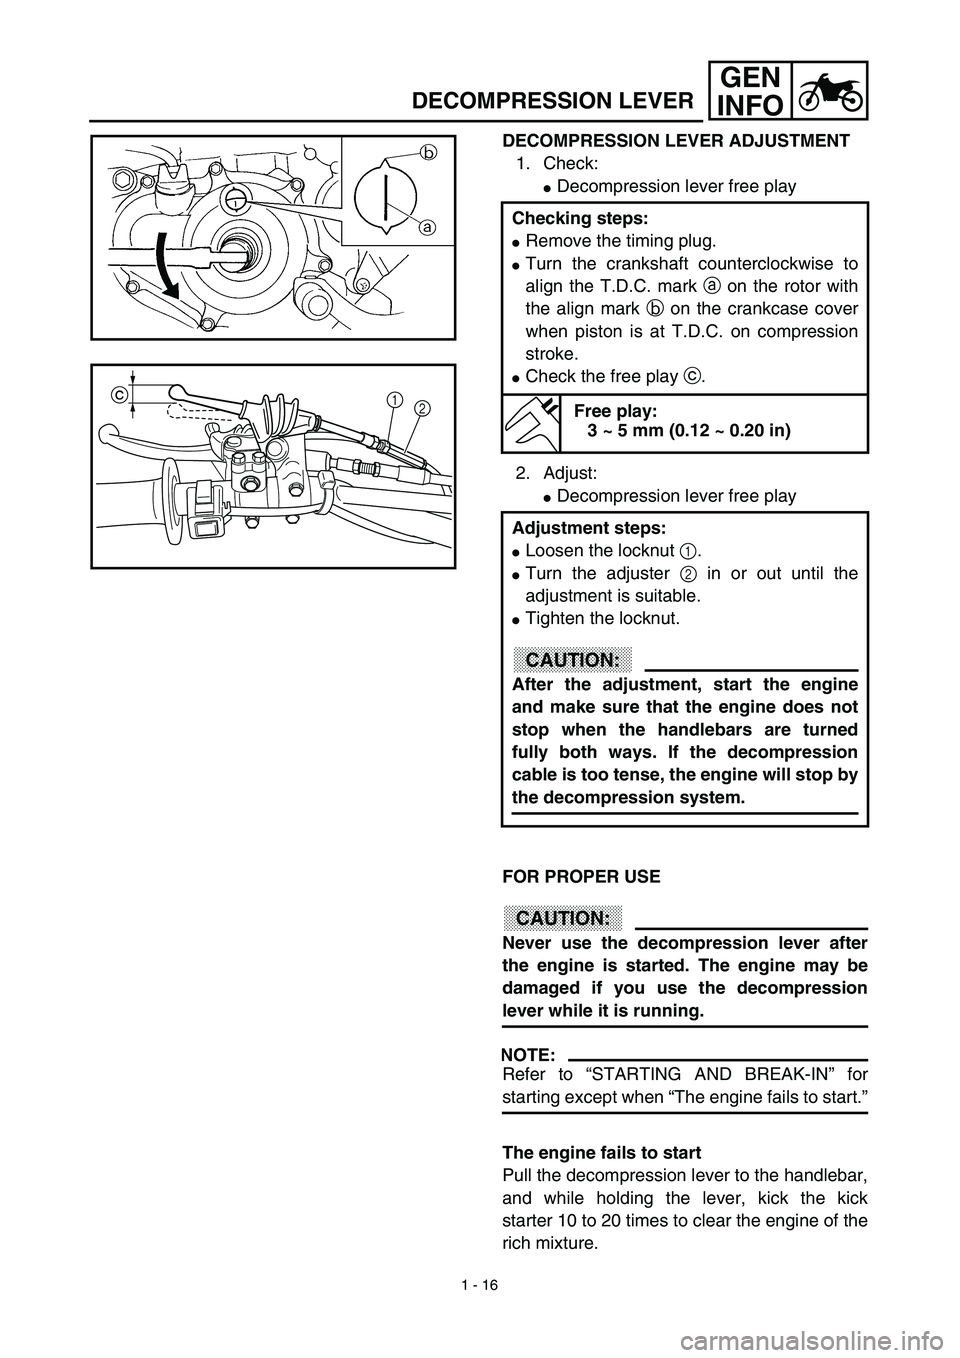 YAMAHA YZ450F 2003  Owners Manual 1 - 16
GEN
INFO
DECOMPRESSION LEVER ADJUSTMENT
1. Check:
Decompression lever free play
2. Adjust:
Decompression lever free play
FOR PROPER USE
CAUTION:
Never use the decompression lever after
the en